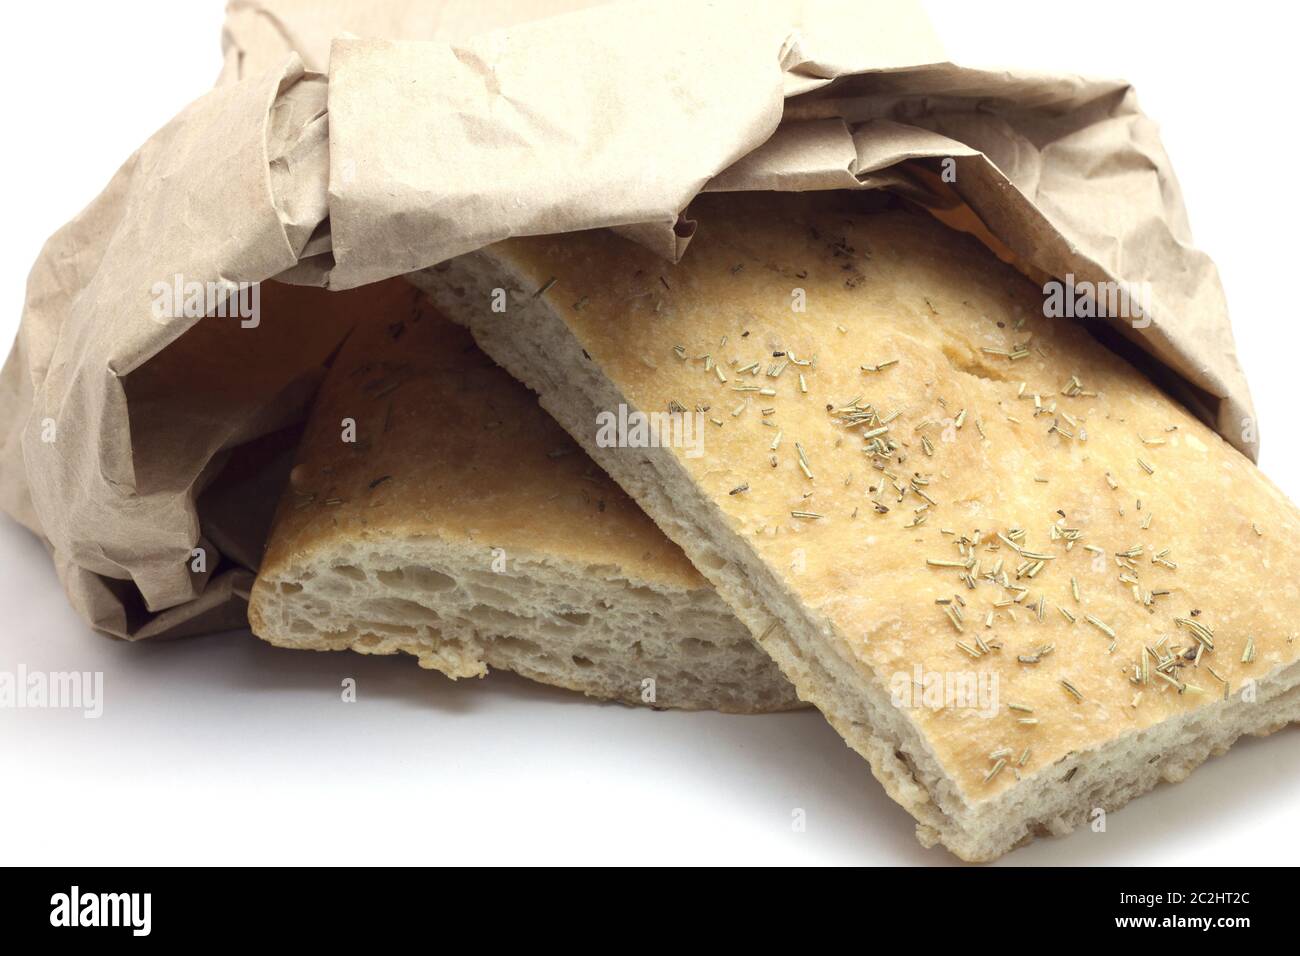 rosemary schiacciata with paper bag for food Stock Photo